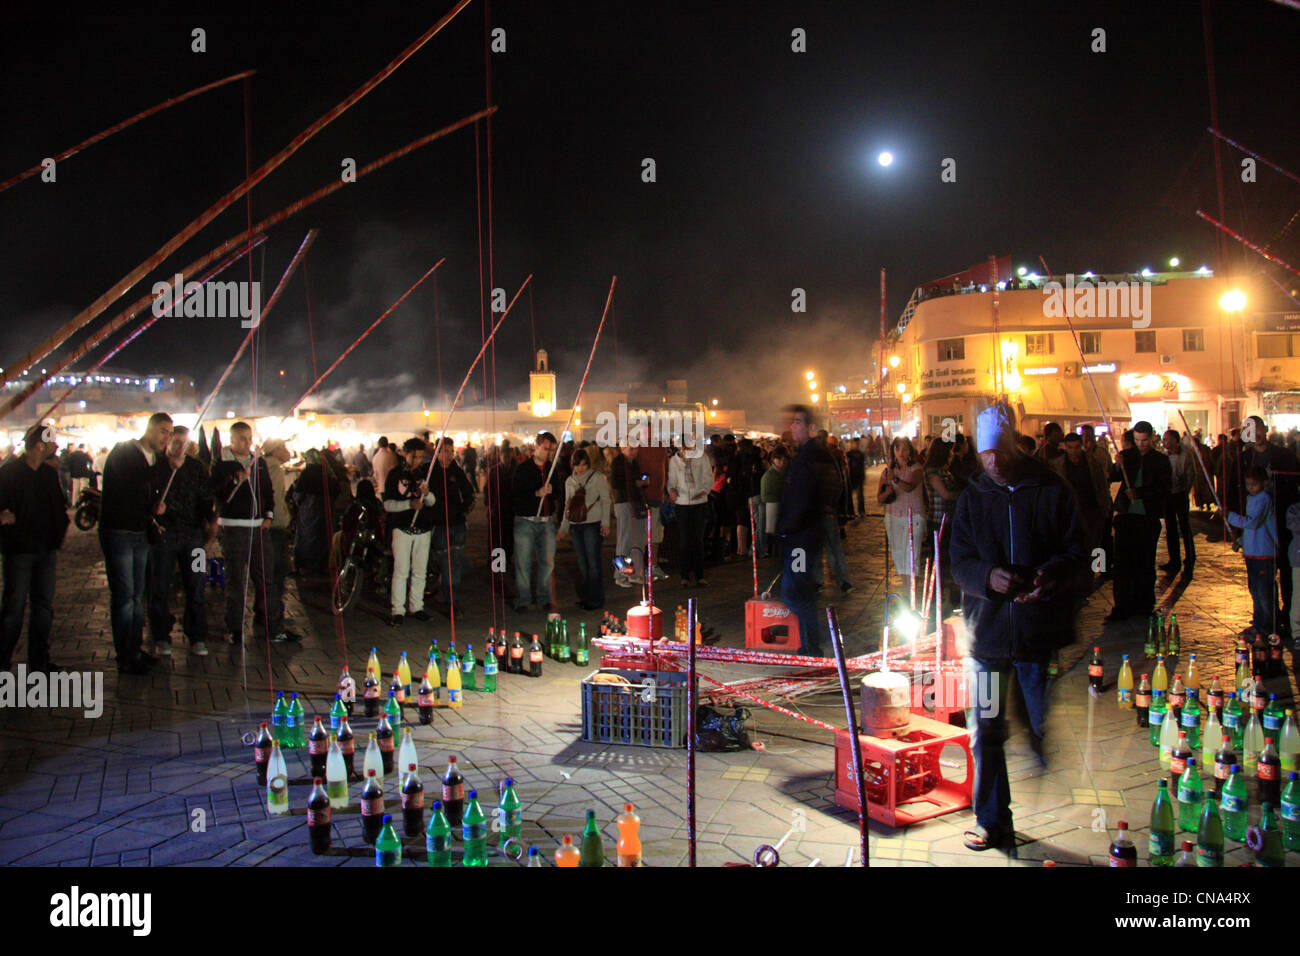 Moroccans playing hoopla with fishing rods over plastic bottles at night in Place Djemaa el-fna, Marrakech, Morocco, north Africa Stock Photo